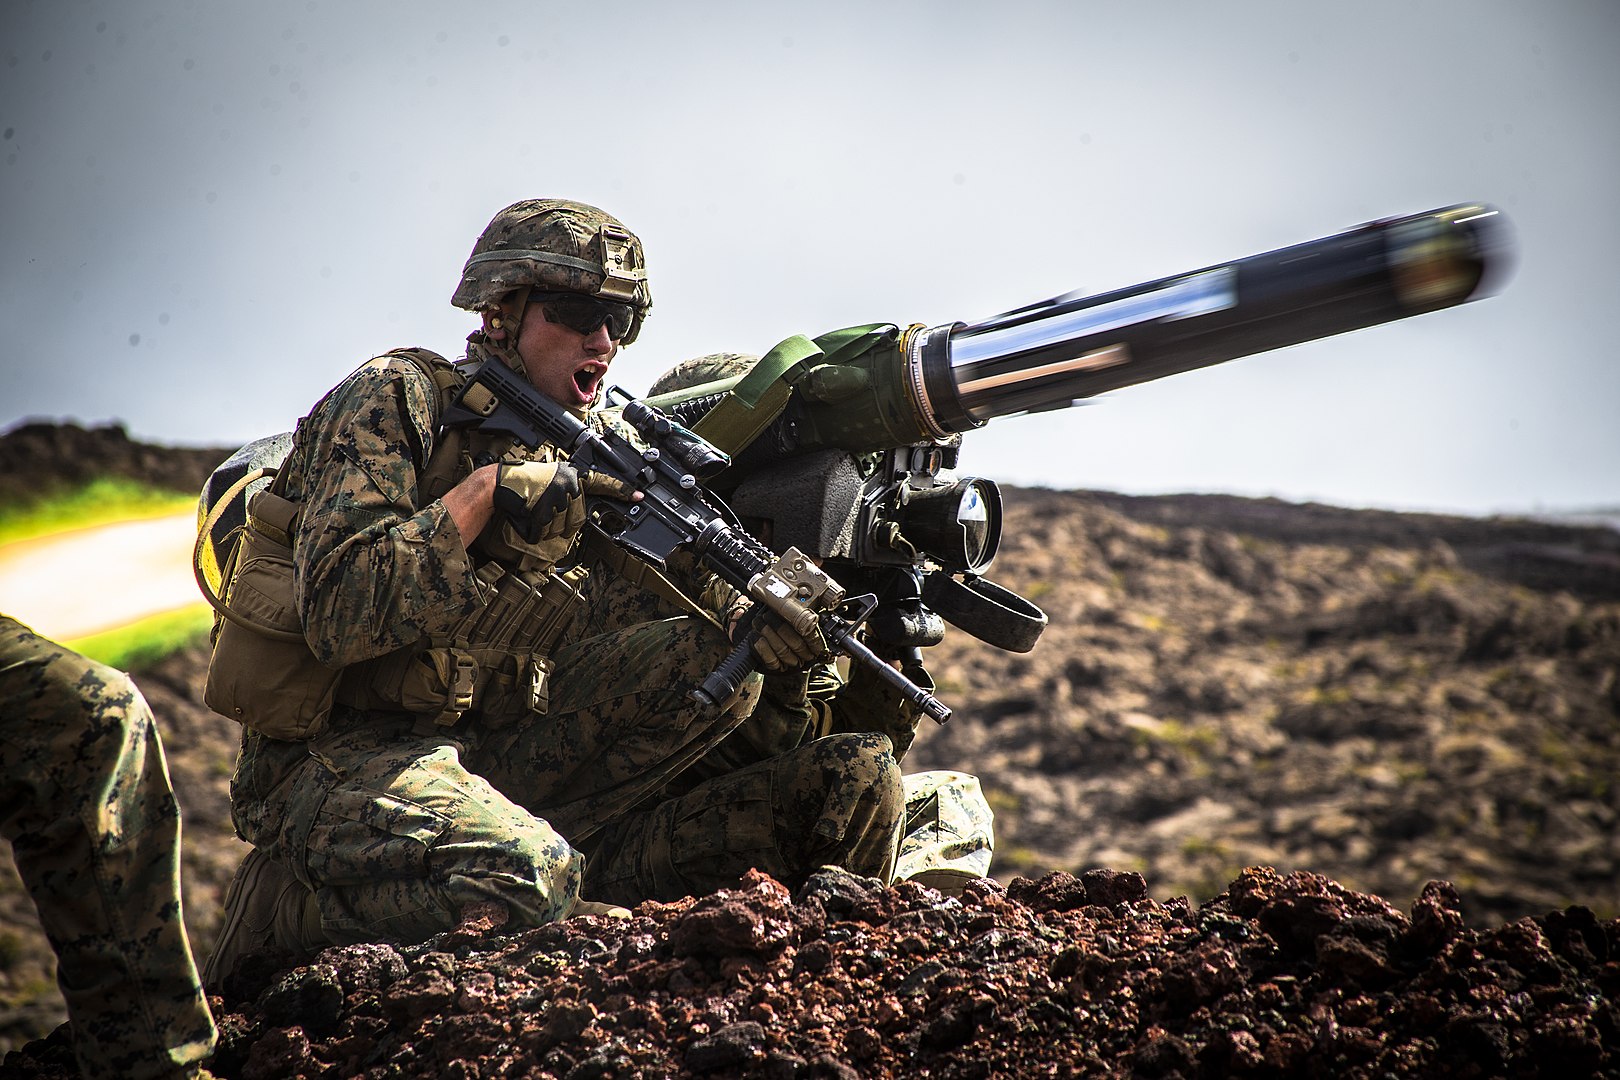 1620px-The_Marines_fires_a_FGM-148_Javelin_missile_during_Exercise_Bougainville_II_on_15_May_2...jpg